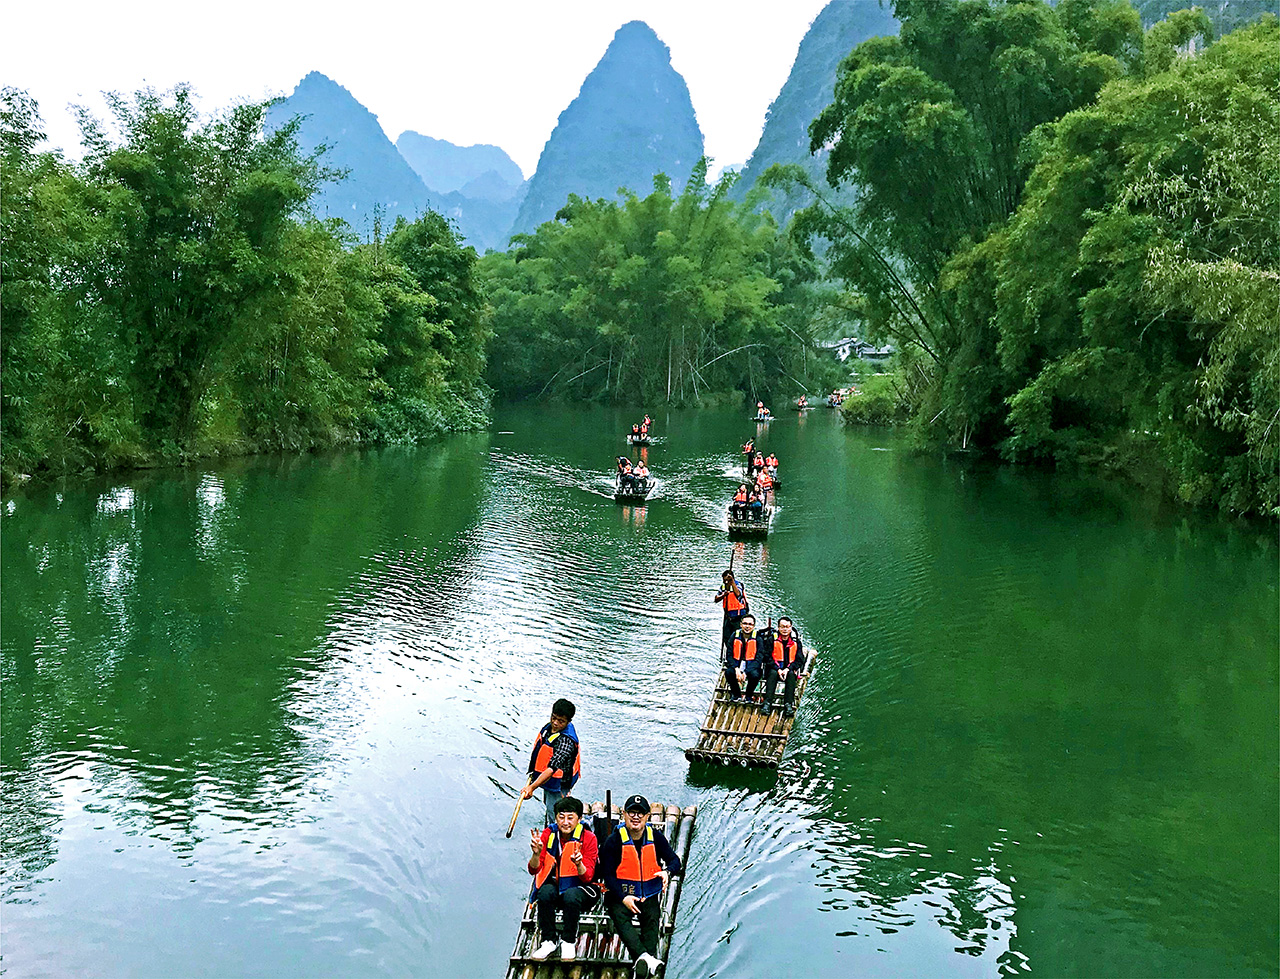 Business delegates enjoying the picturesque sceneries during an incentive trip to Guilin